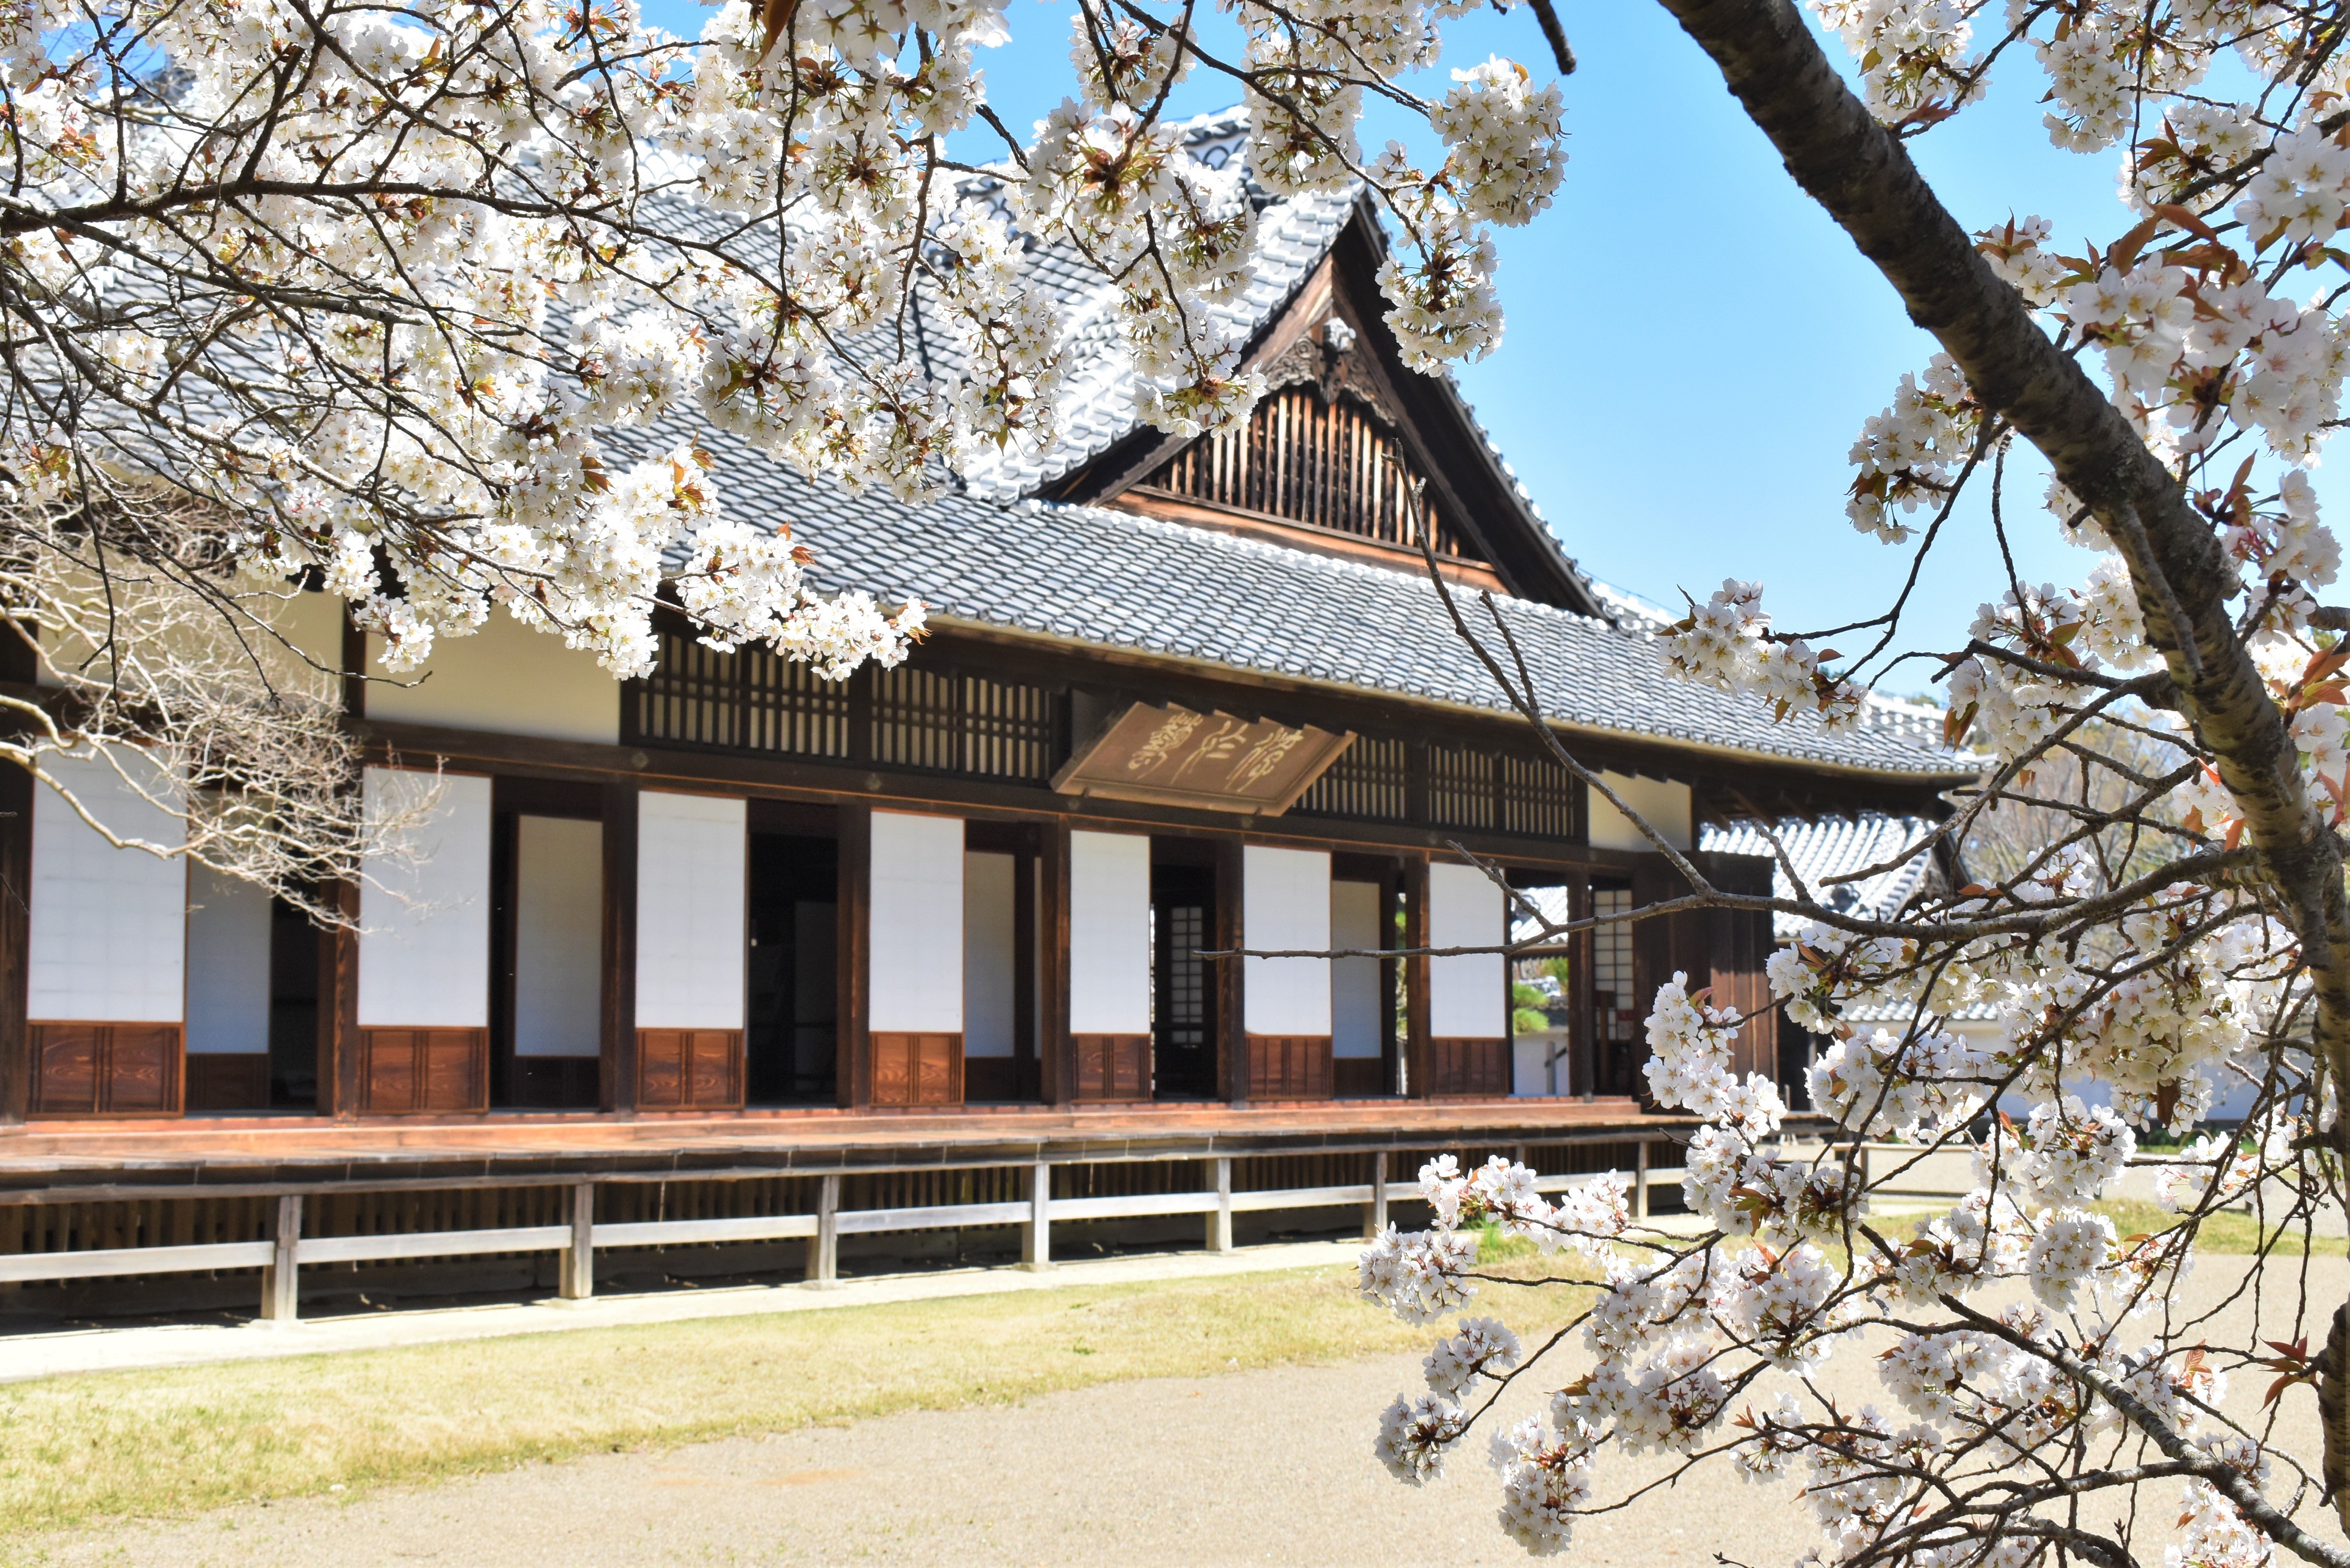 Kodokan, an academic hall of fame surrounded by plum blossoms